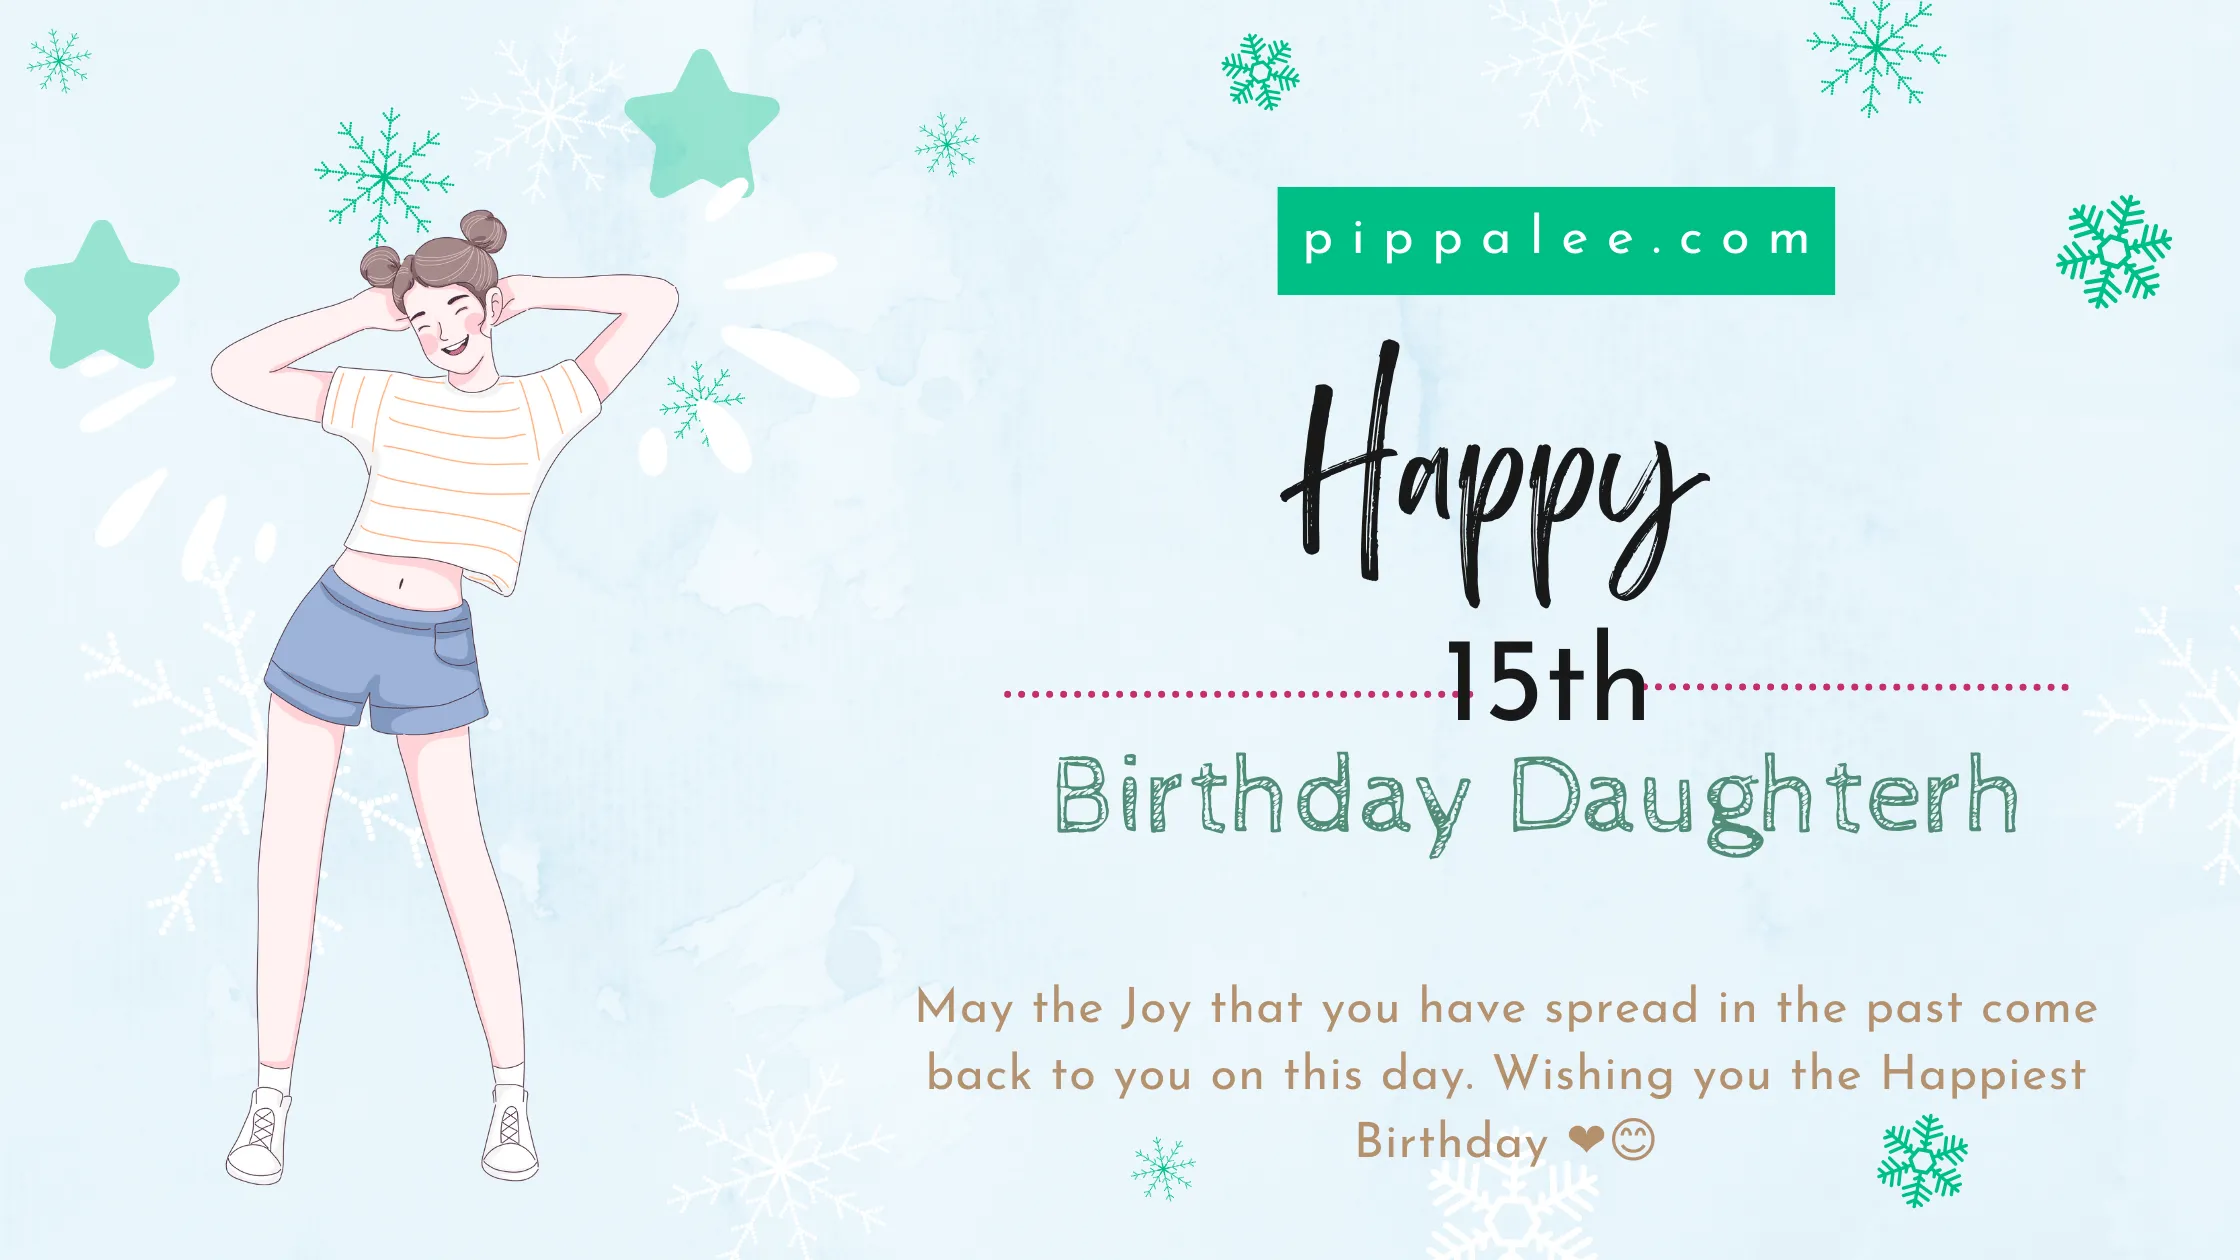 Happy 15th Birthday Daughter - Wishes & Messages